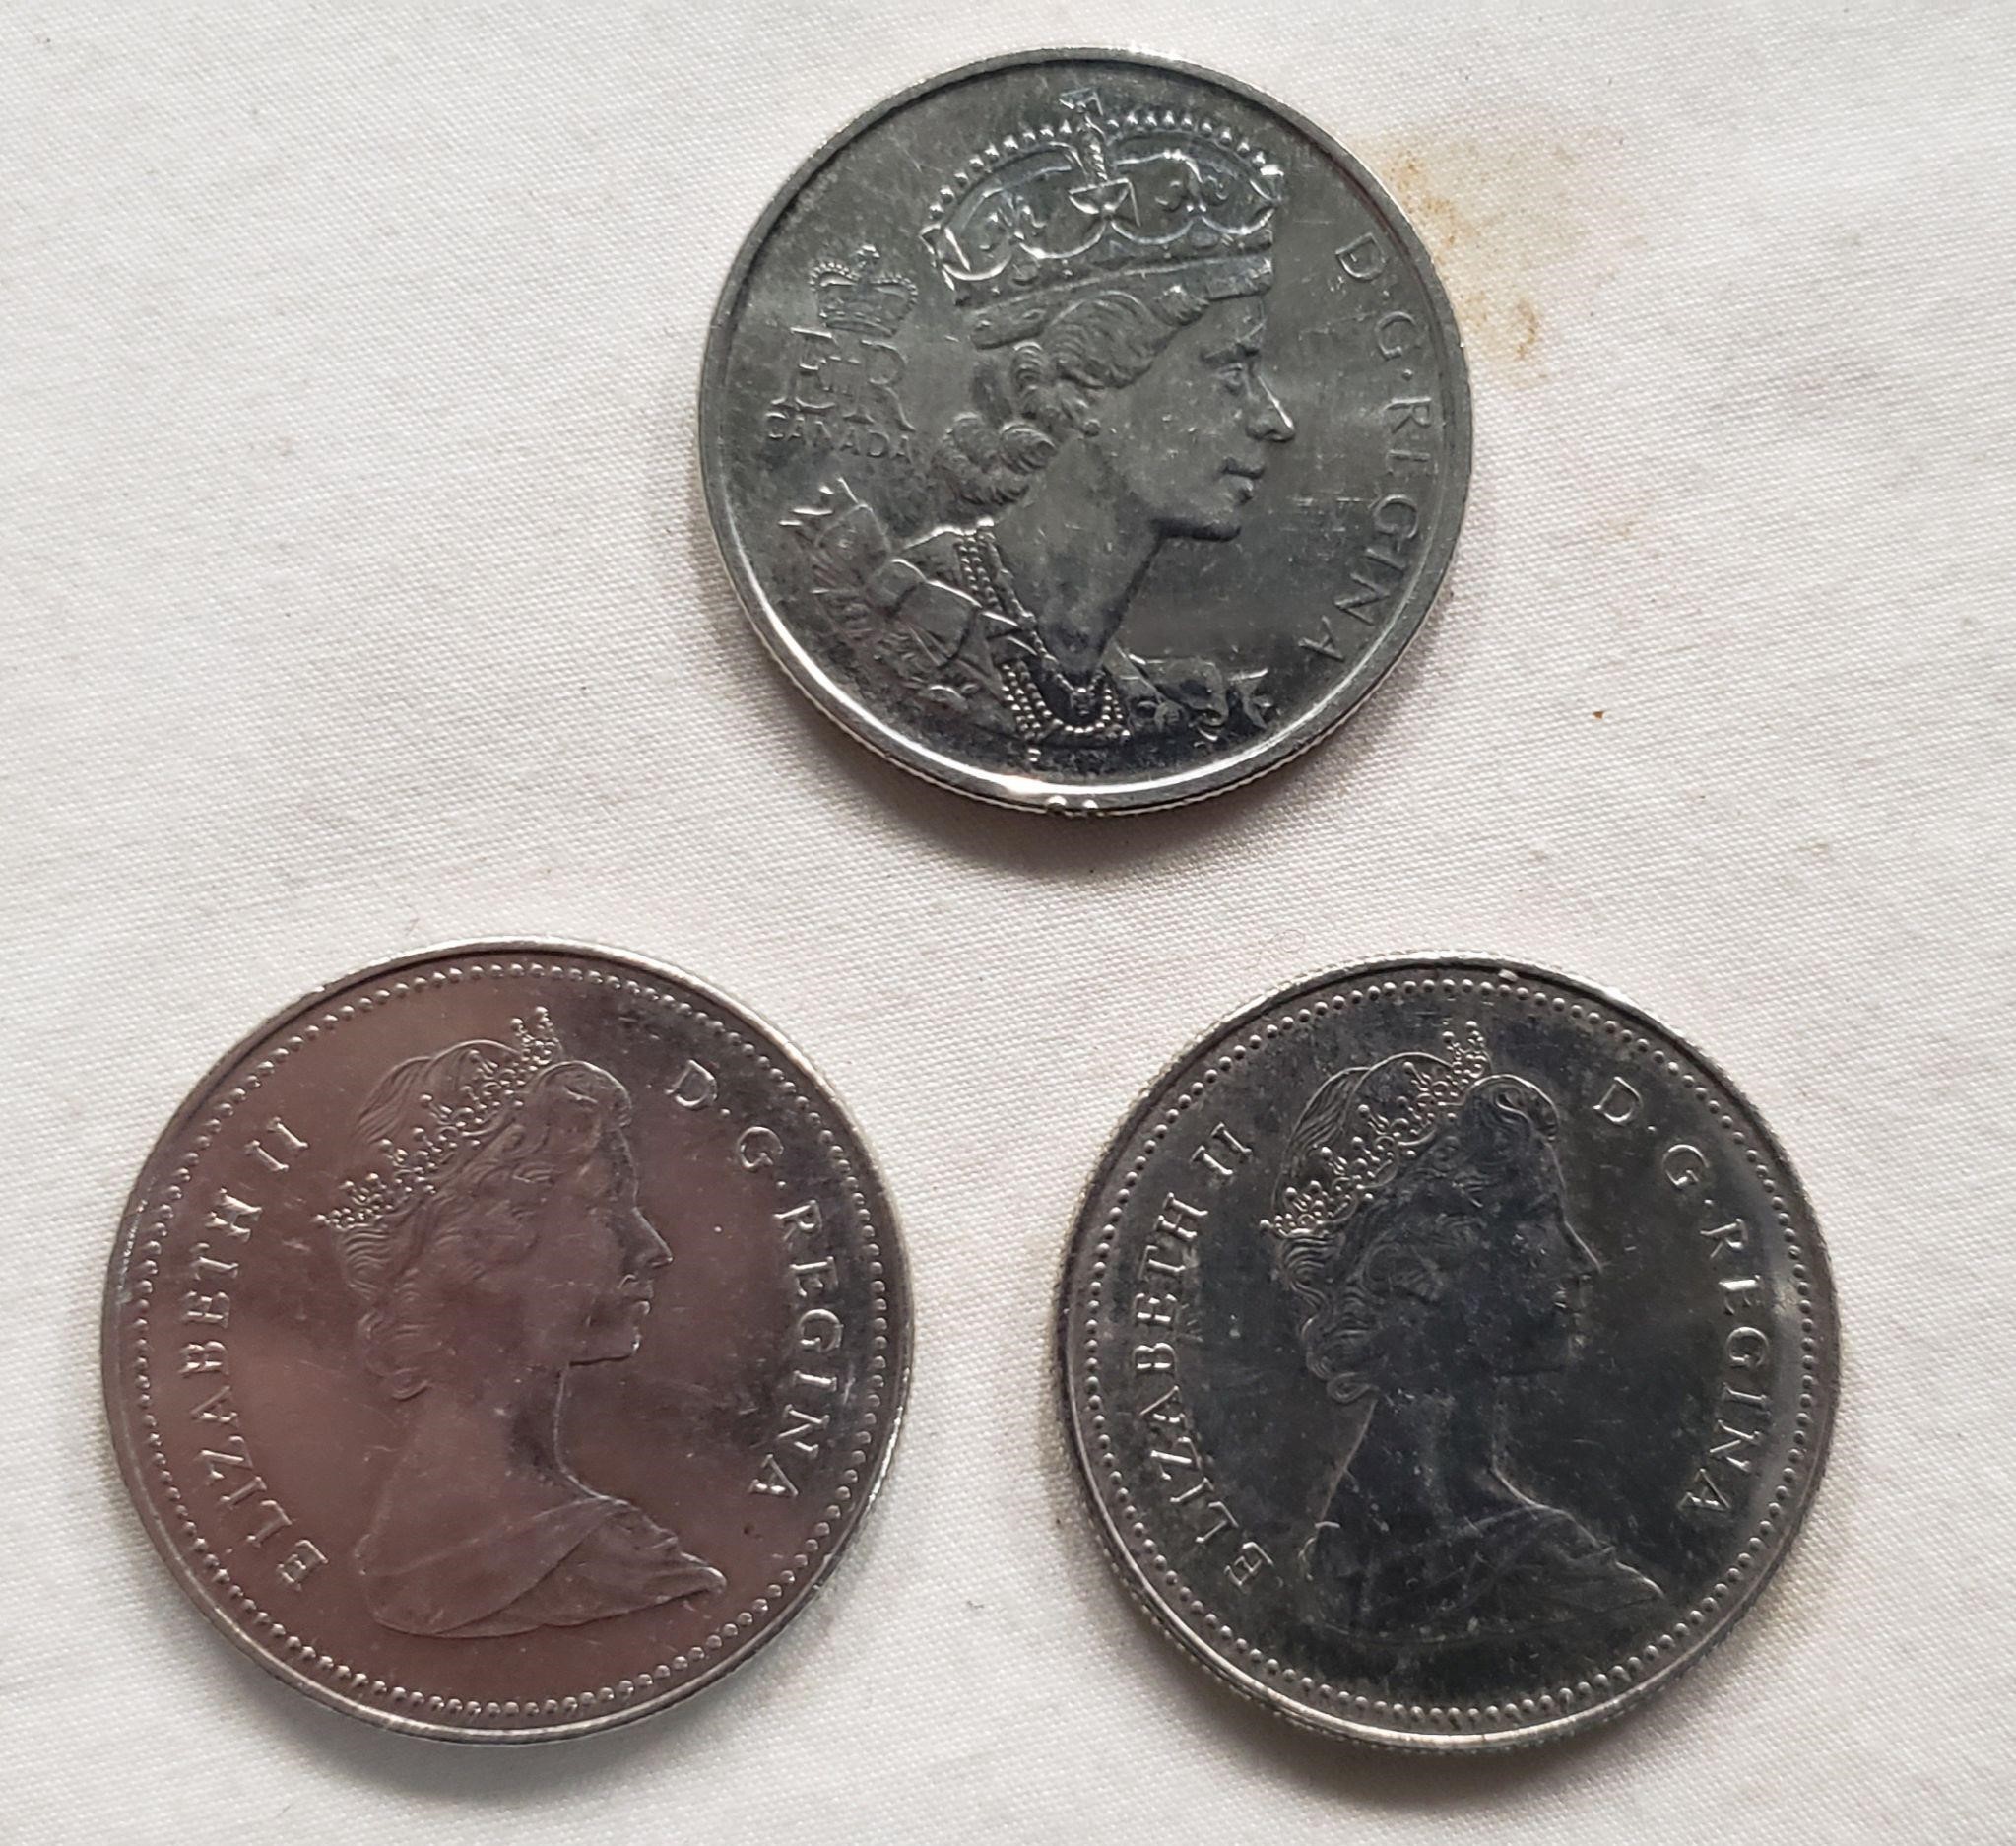 Canadian 50 Cent Coin's 3 in total